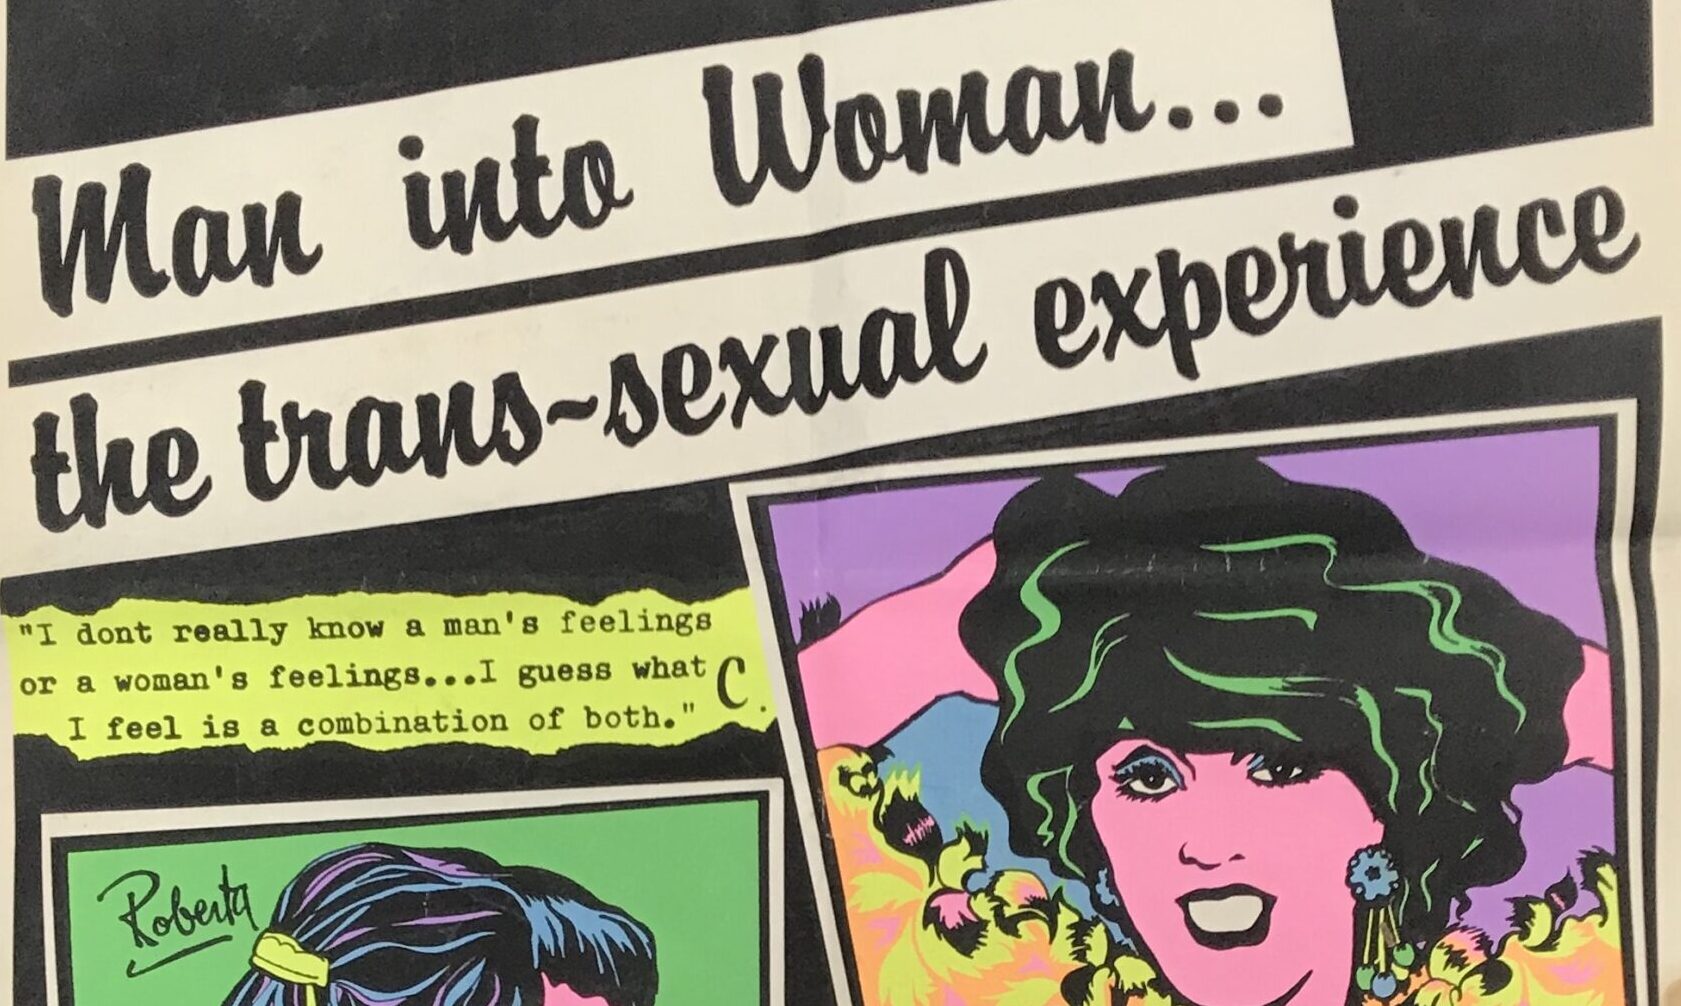 Man into woman... the trans-sexual experience, 1983